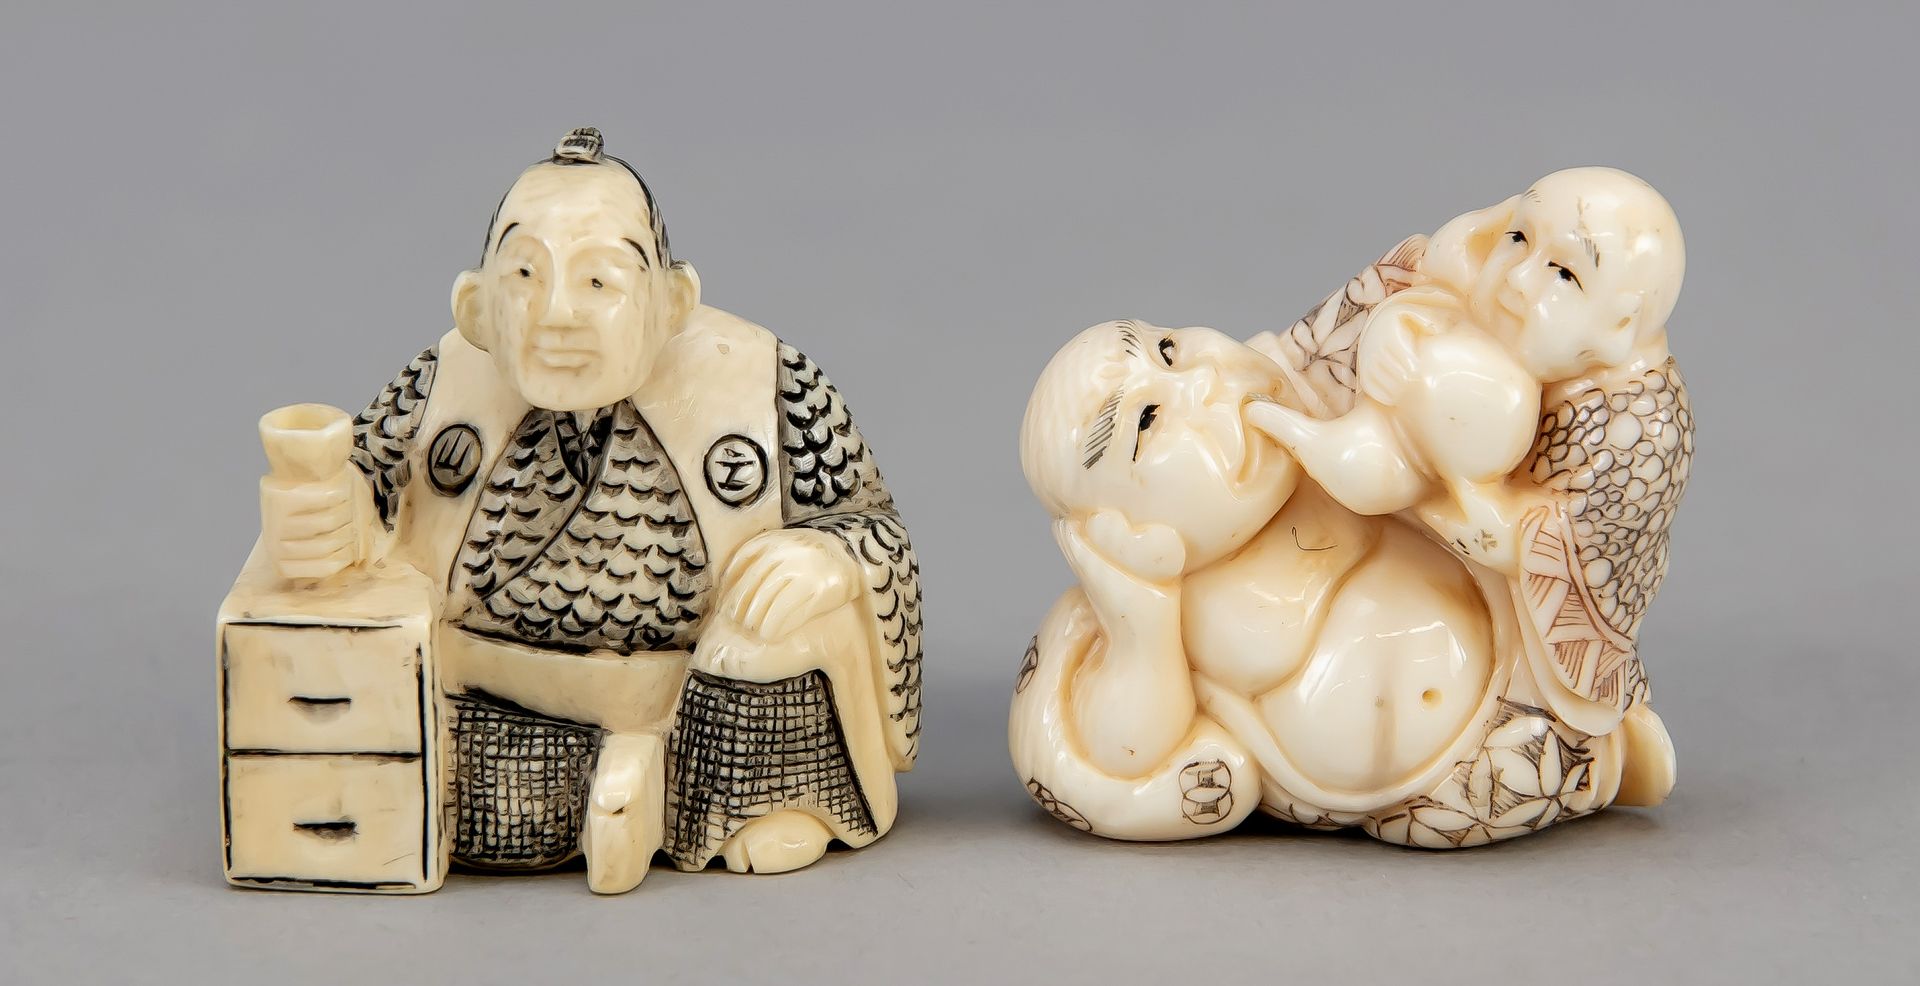 Null 3 Netsuke, Japan, late 19th c., ivory. All signed in incision, d. To 5,5 cm